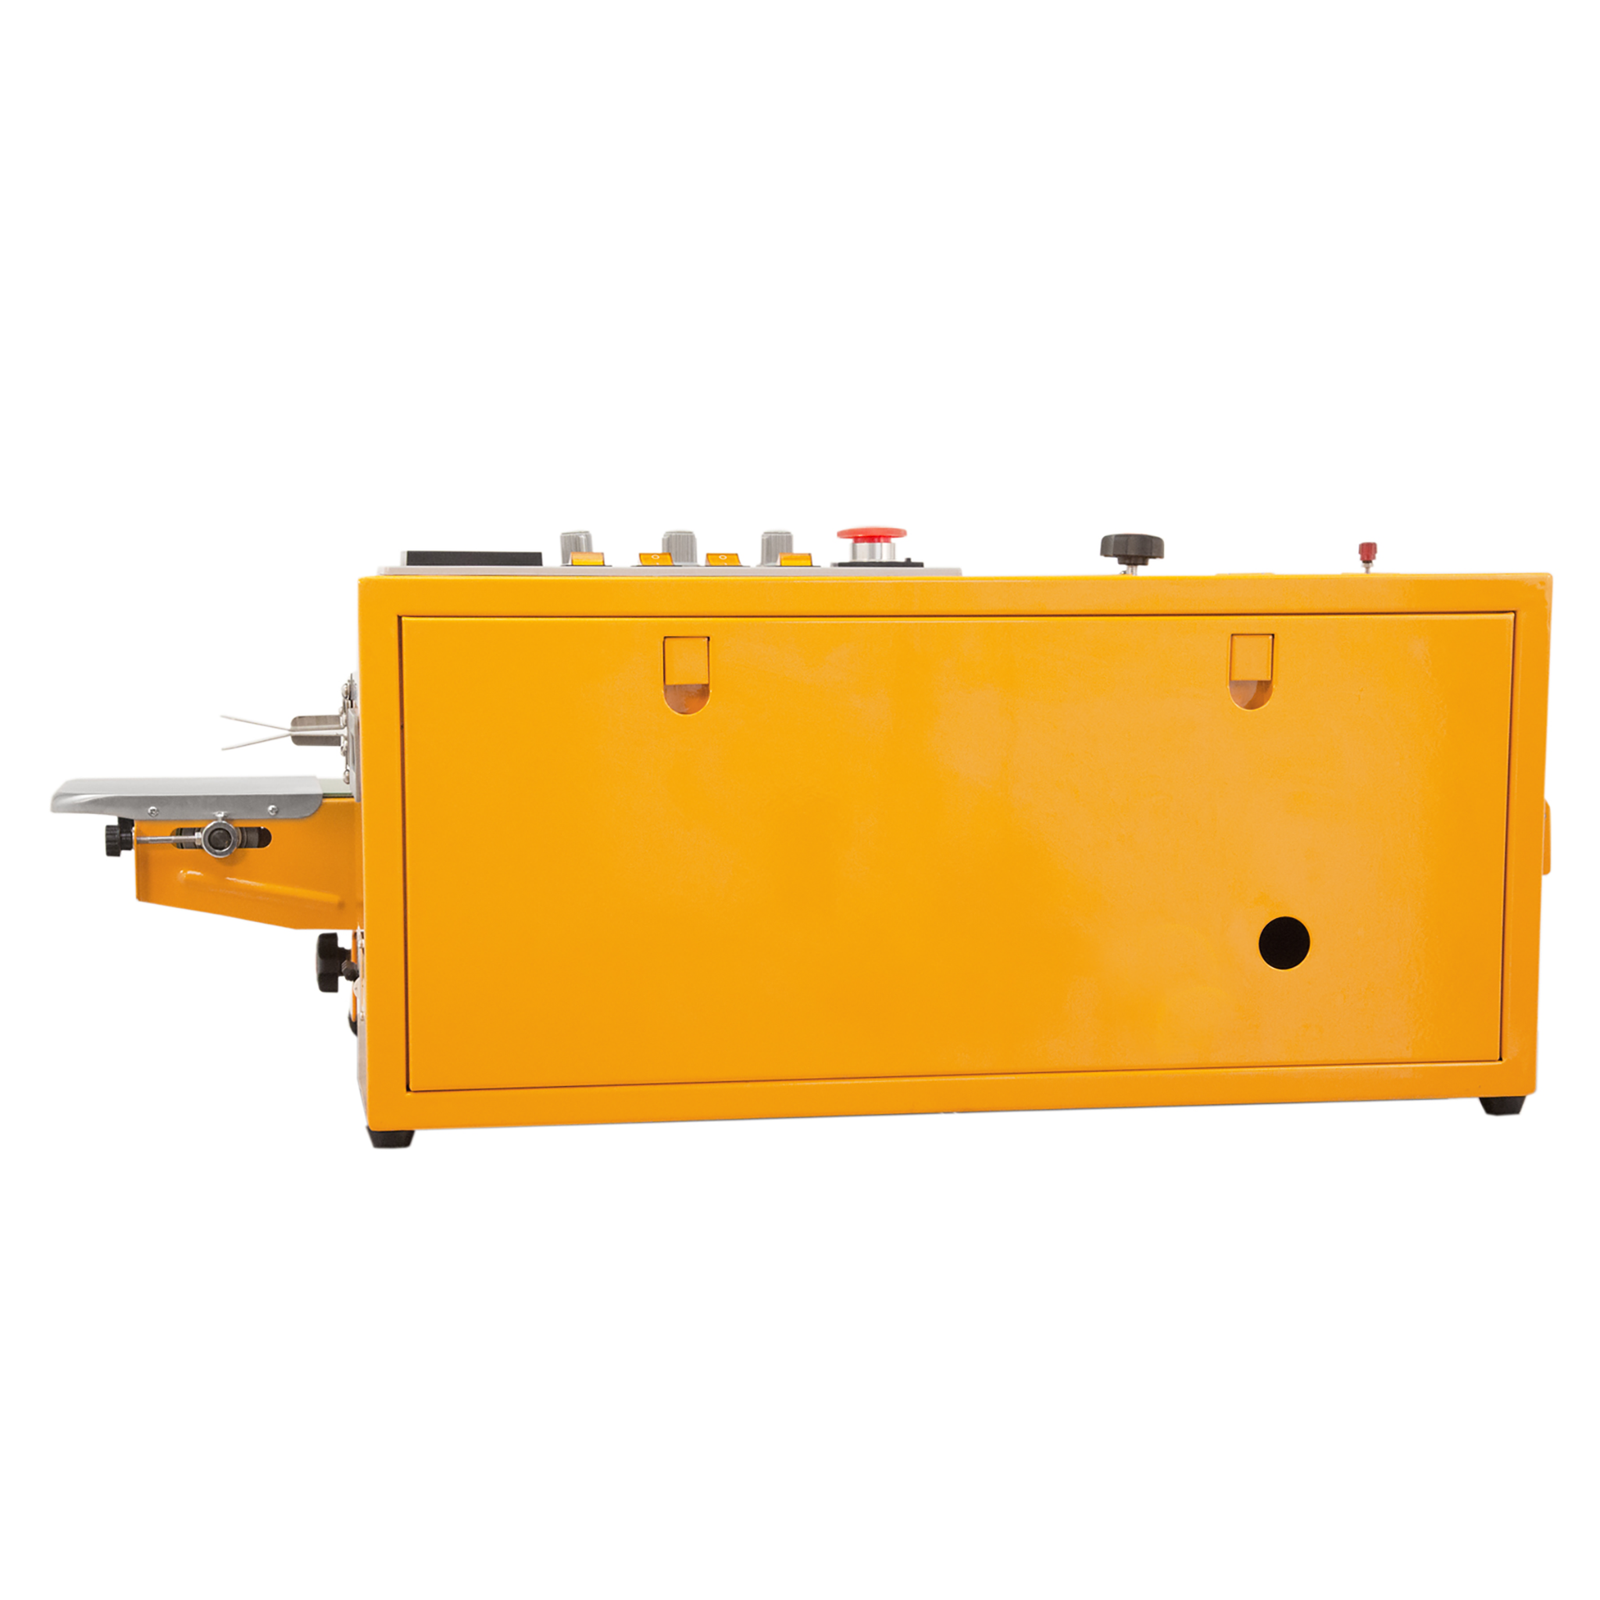 continuous band sealer for end of production lines